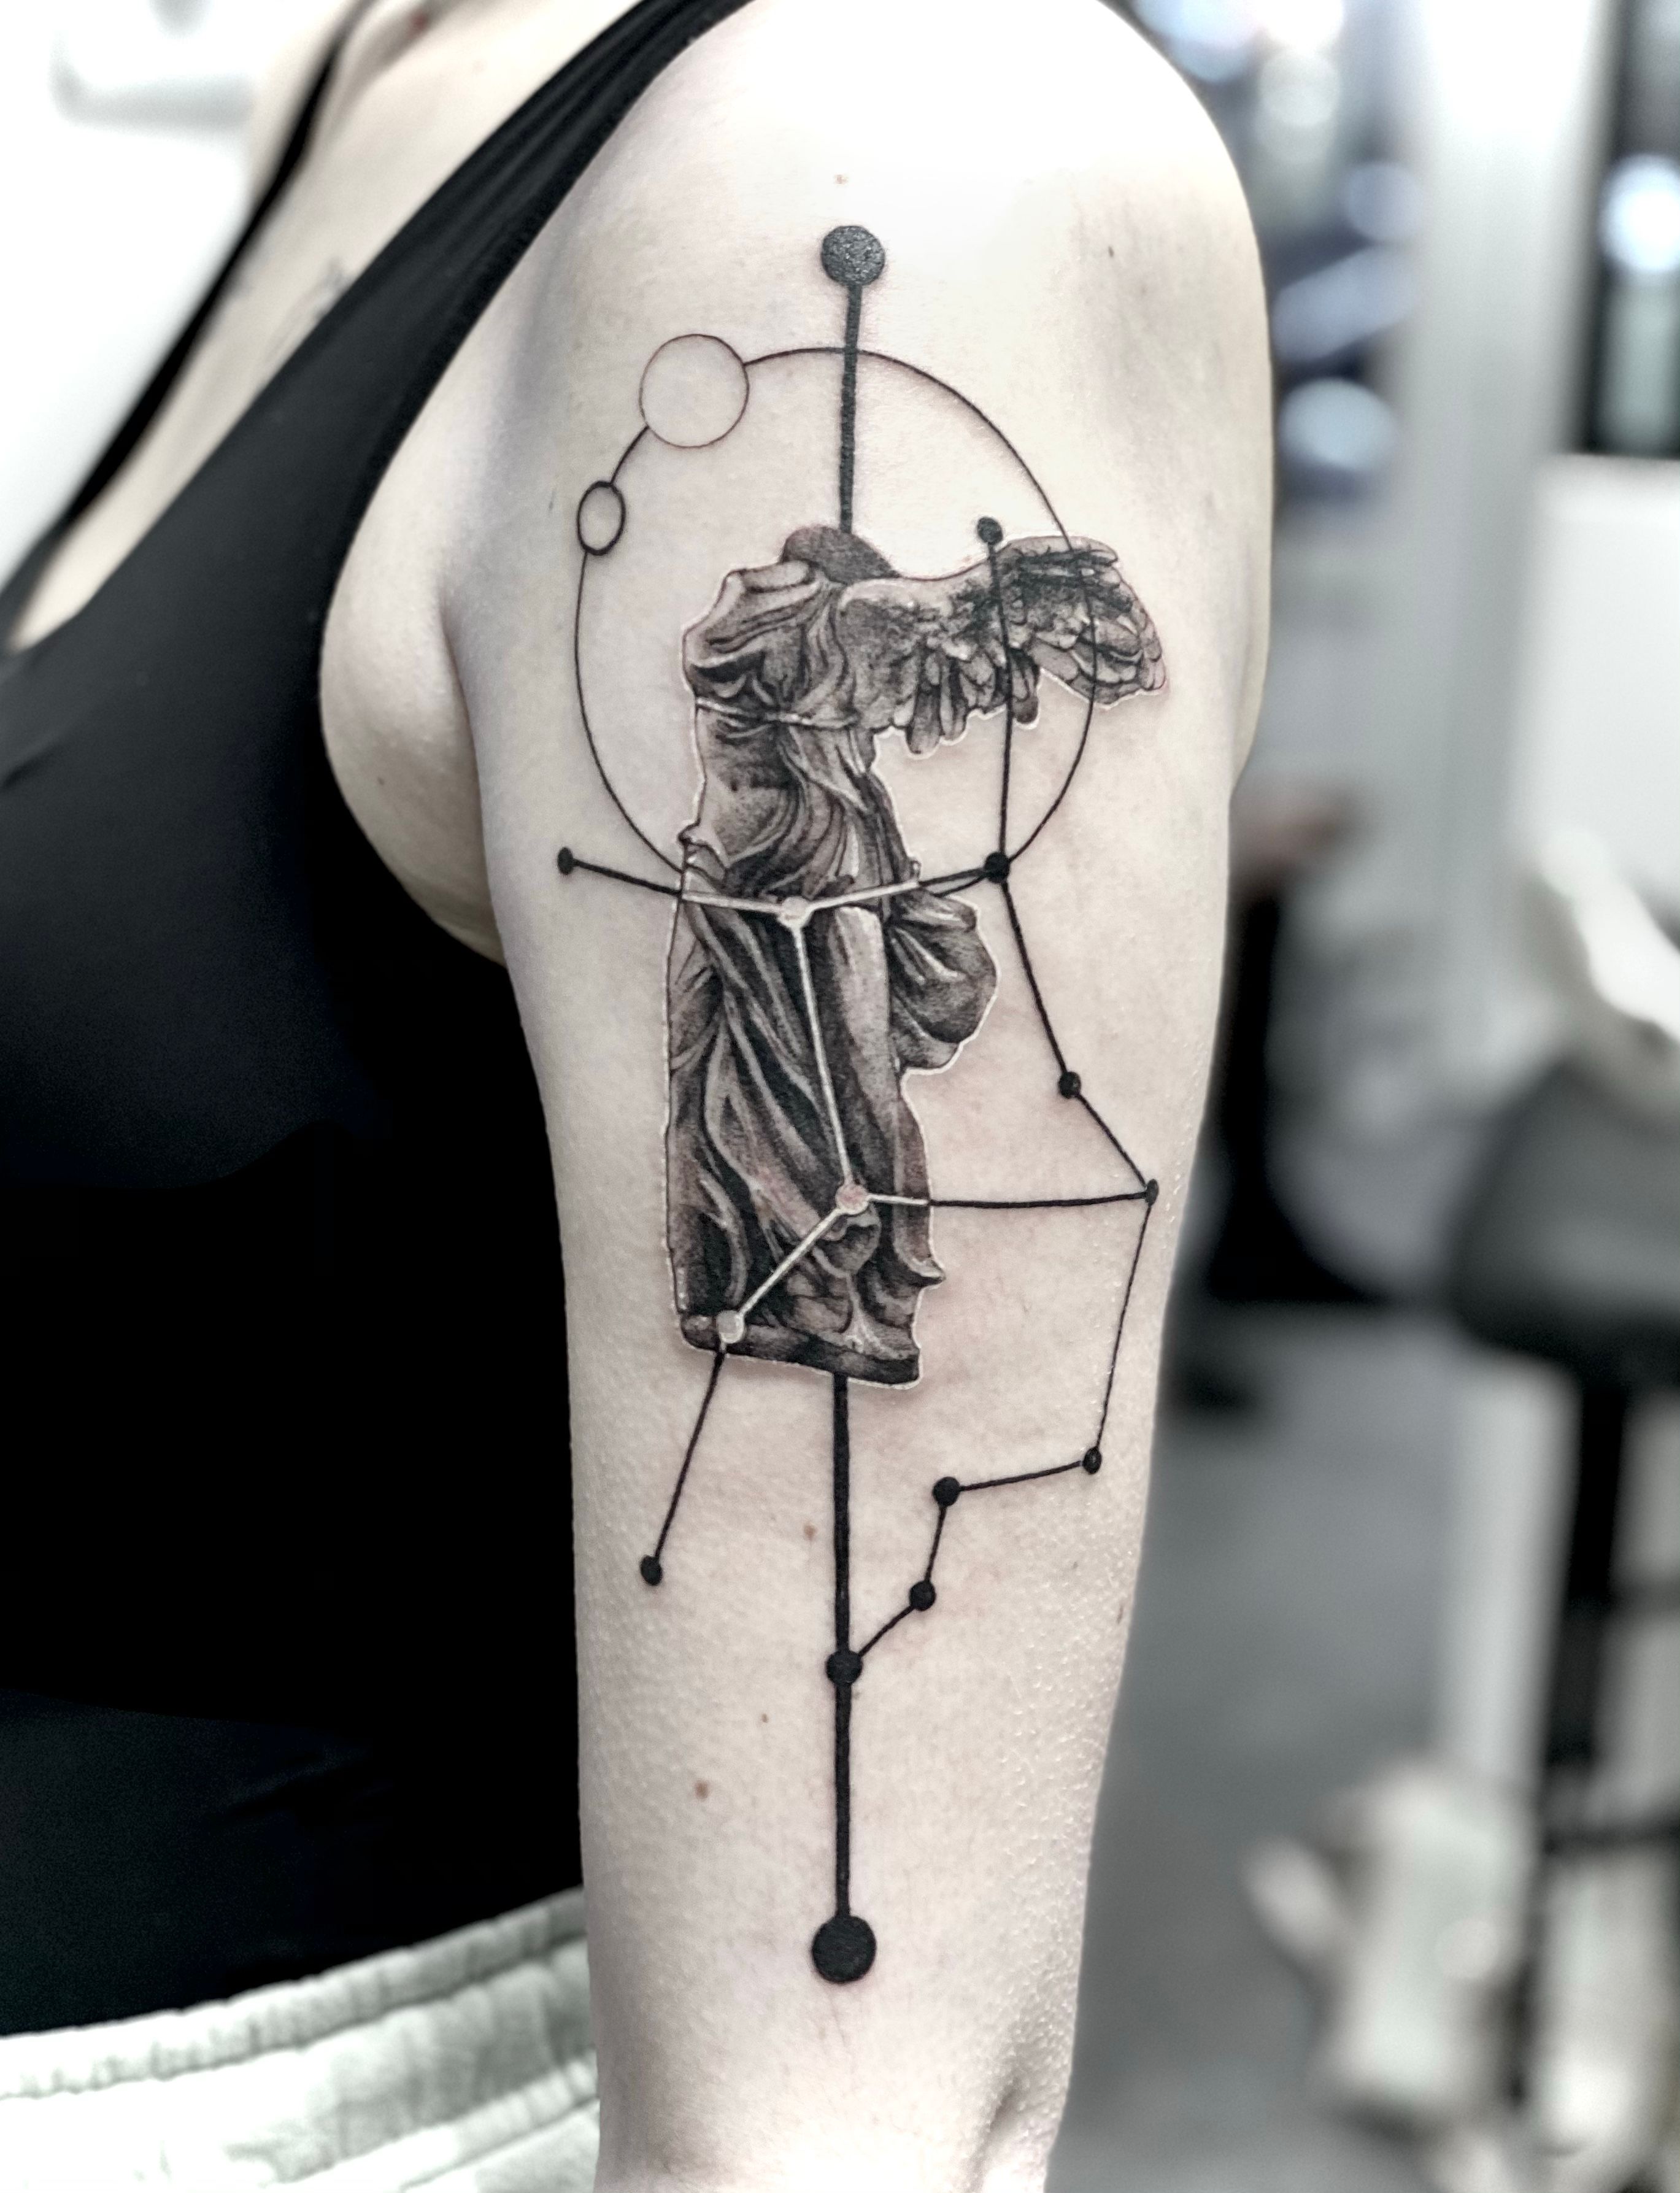 The Tell Tale Heart on Twitter Winged Victory of Samothrace Greek  Goddess of Victory tattoo by Mike Beddome httpstcoYOad0fiZFi   Twitter